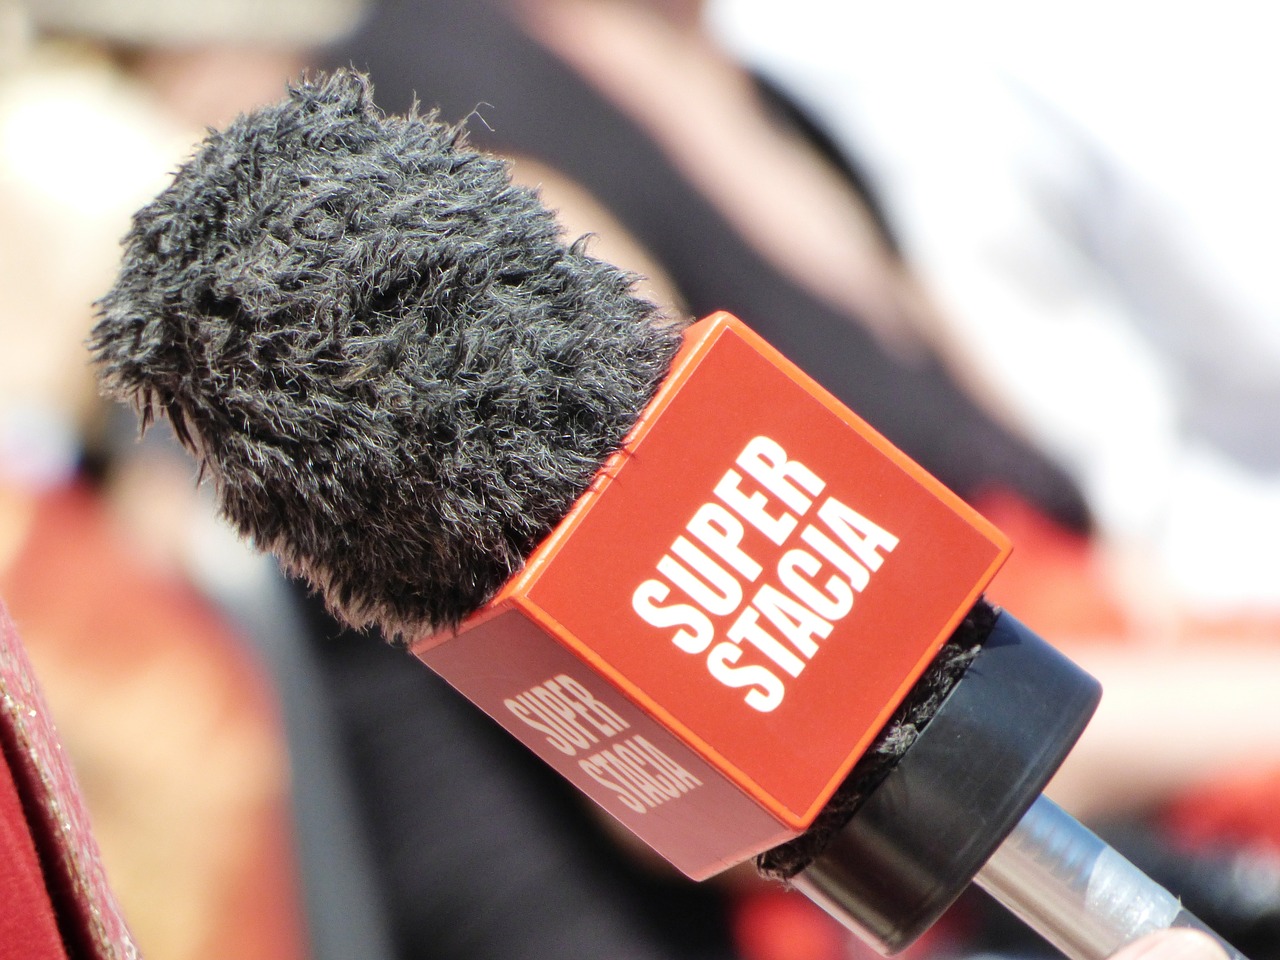 microphone reporter interview free photo